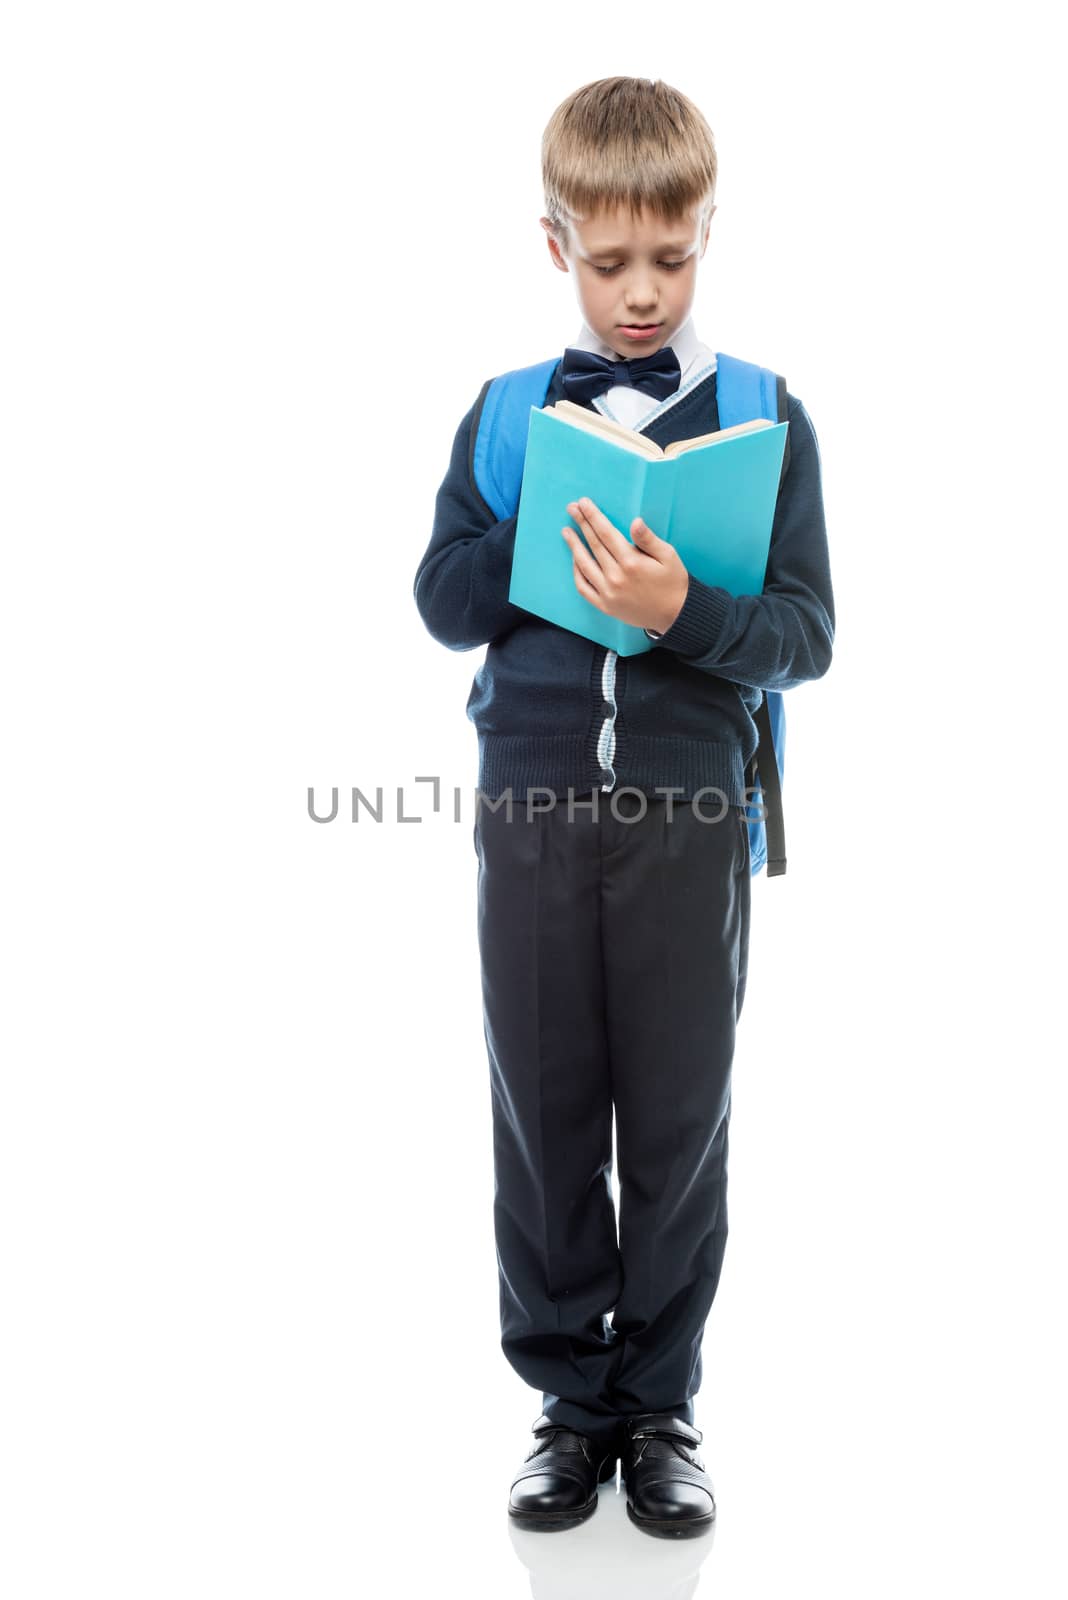 schoolboy with textbook and backpack on a white background in full length isolated